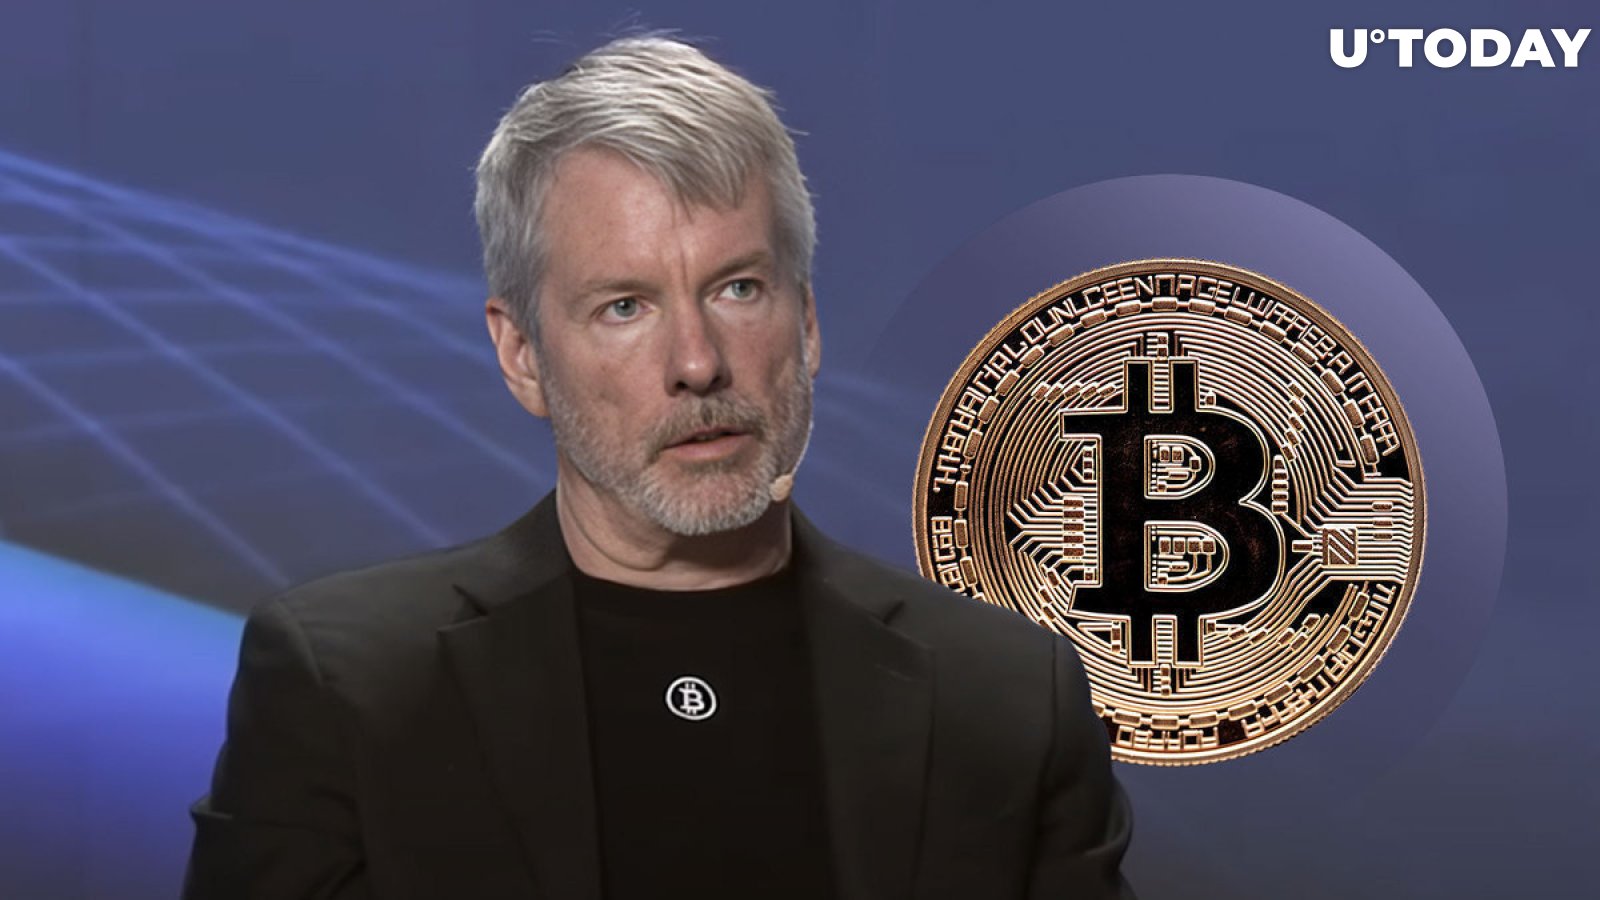 'Bitcoin Prize' Tweet Issued by Michael Saylor, Here's His Price Hint